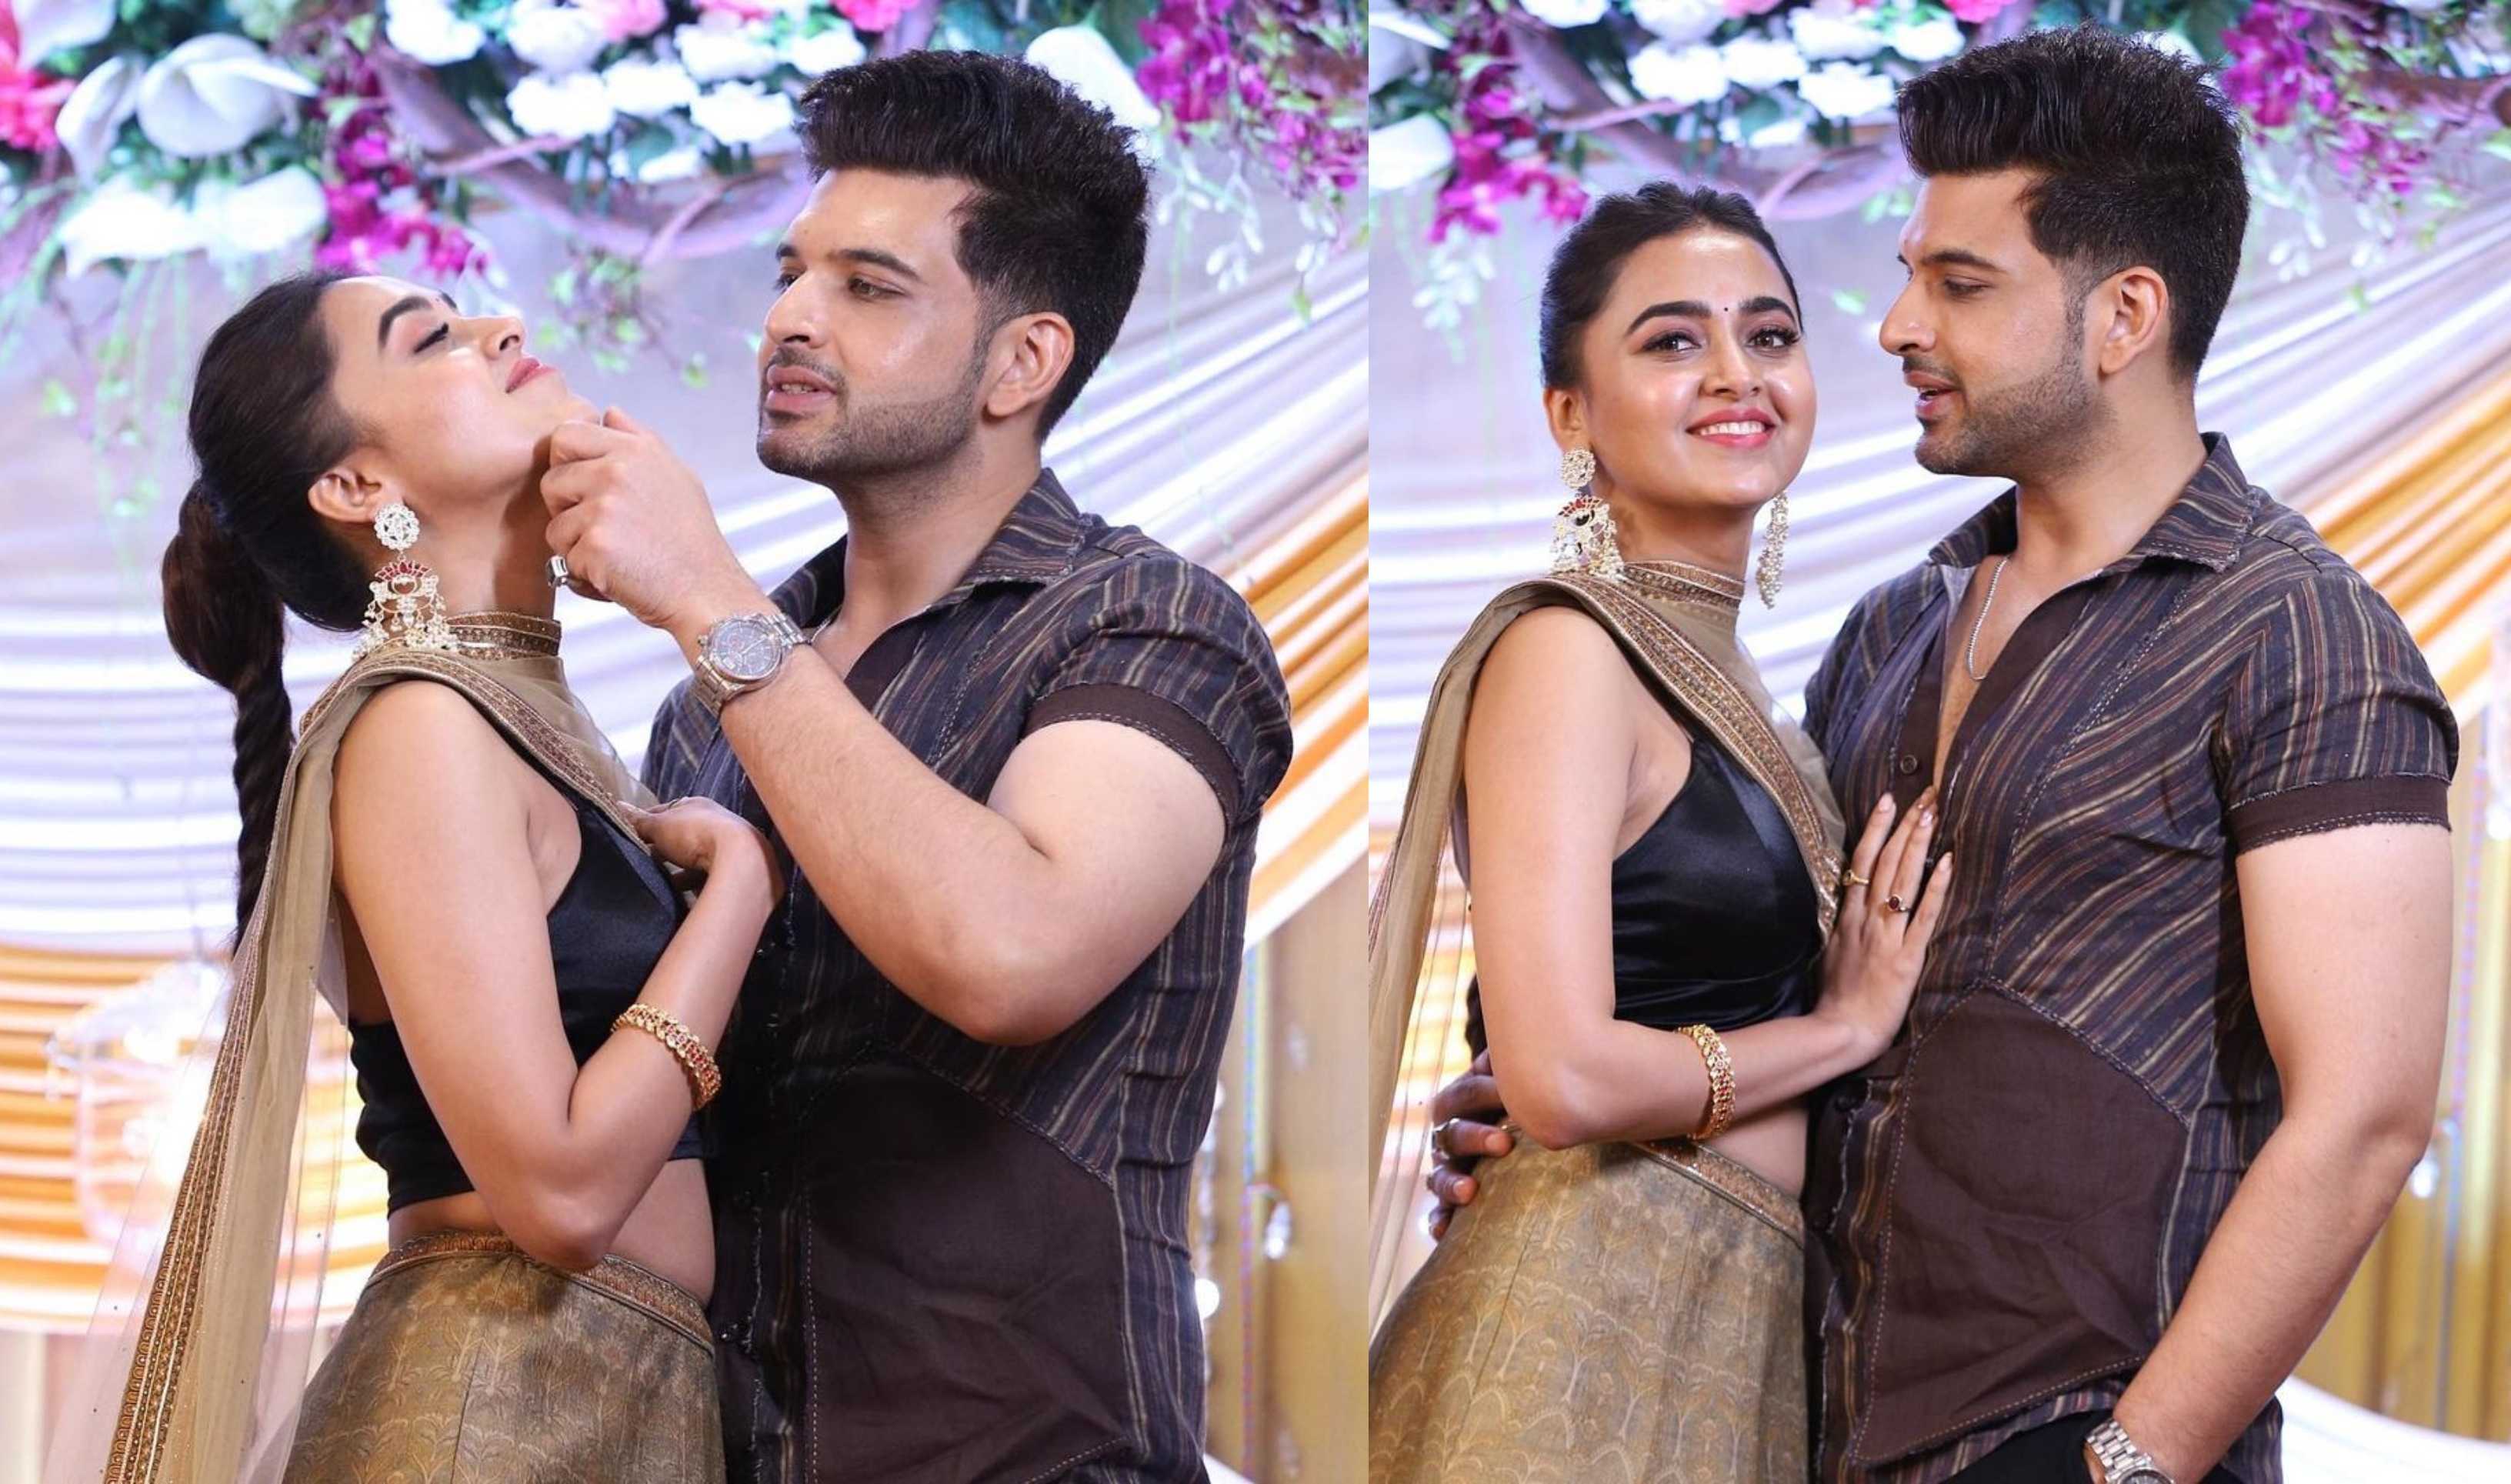 Tejasswi Prakash and Karan Kundrra’s latest post makes fans wonder if they secretly got married; check it out